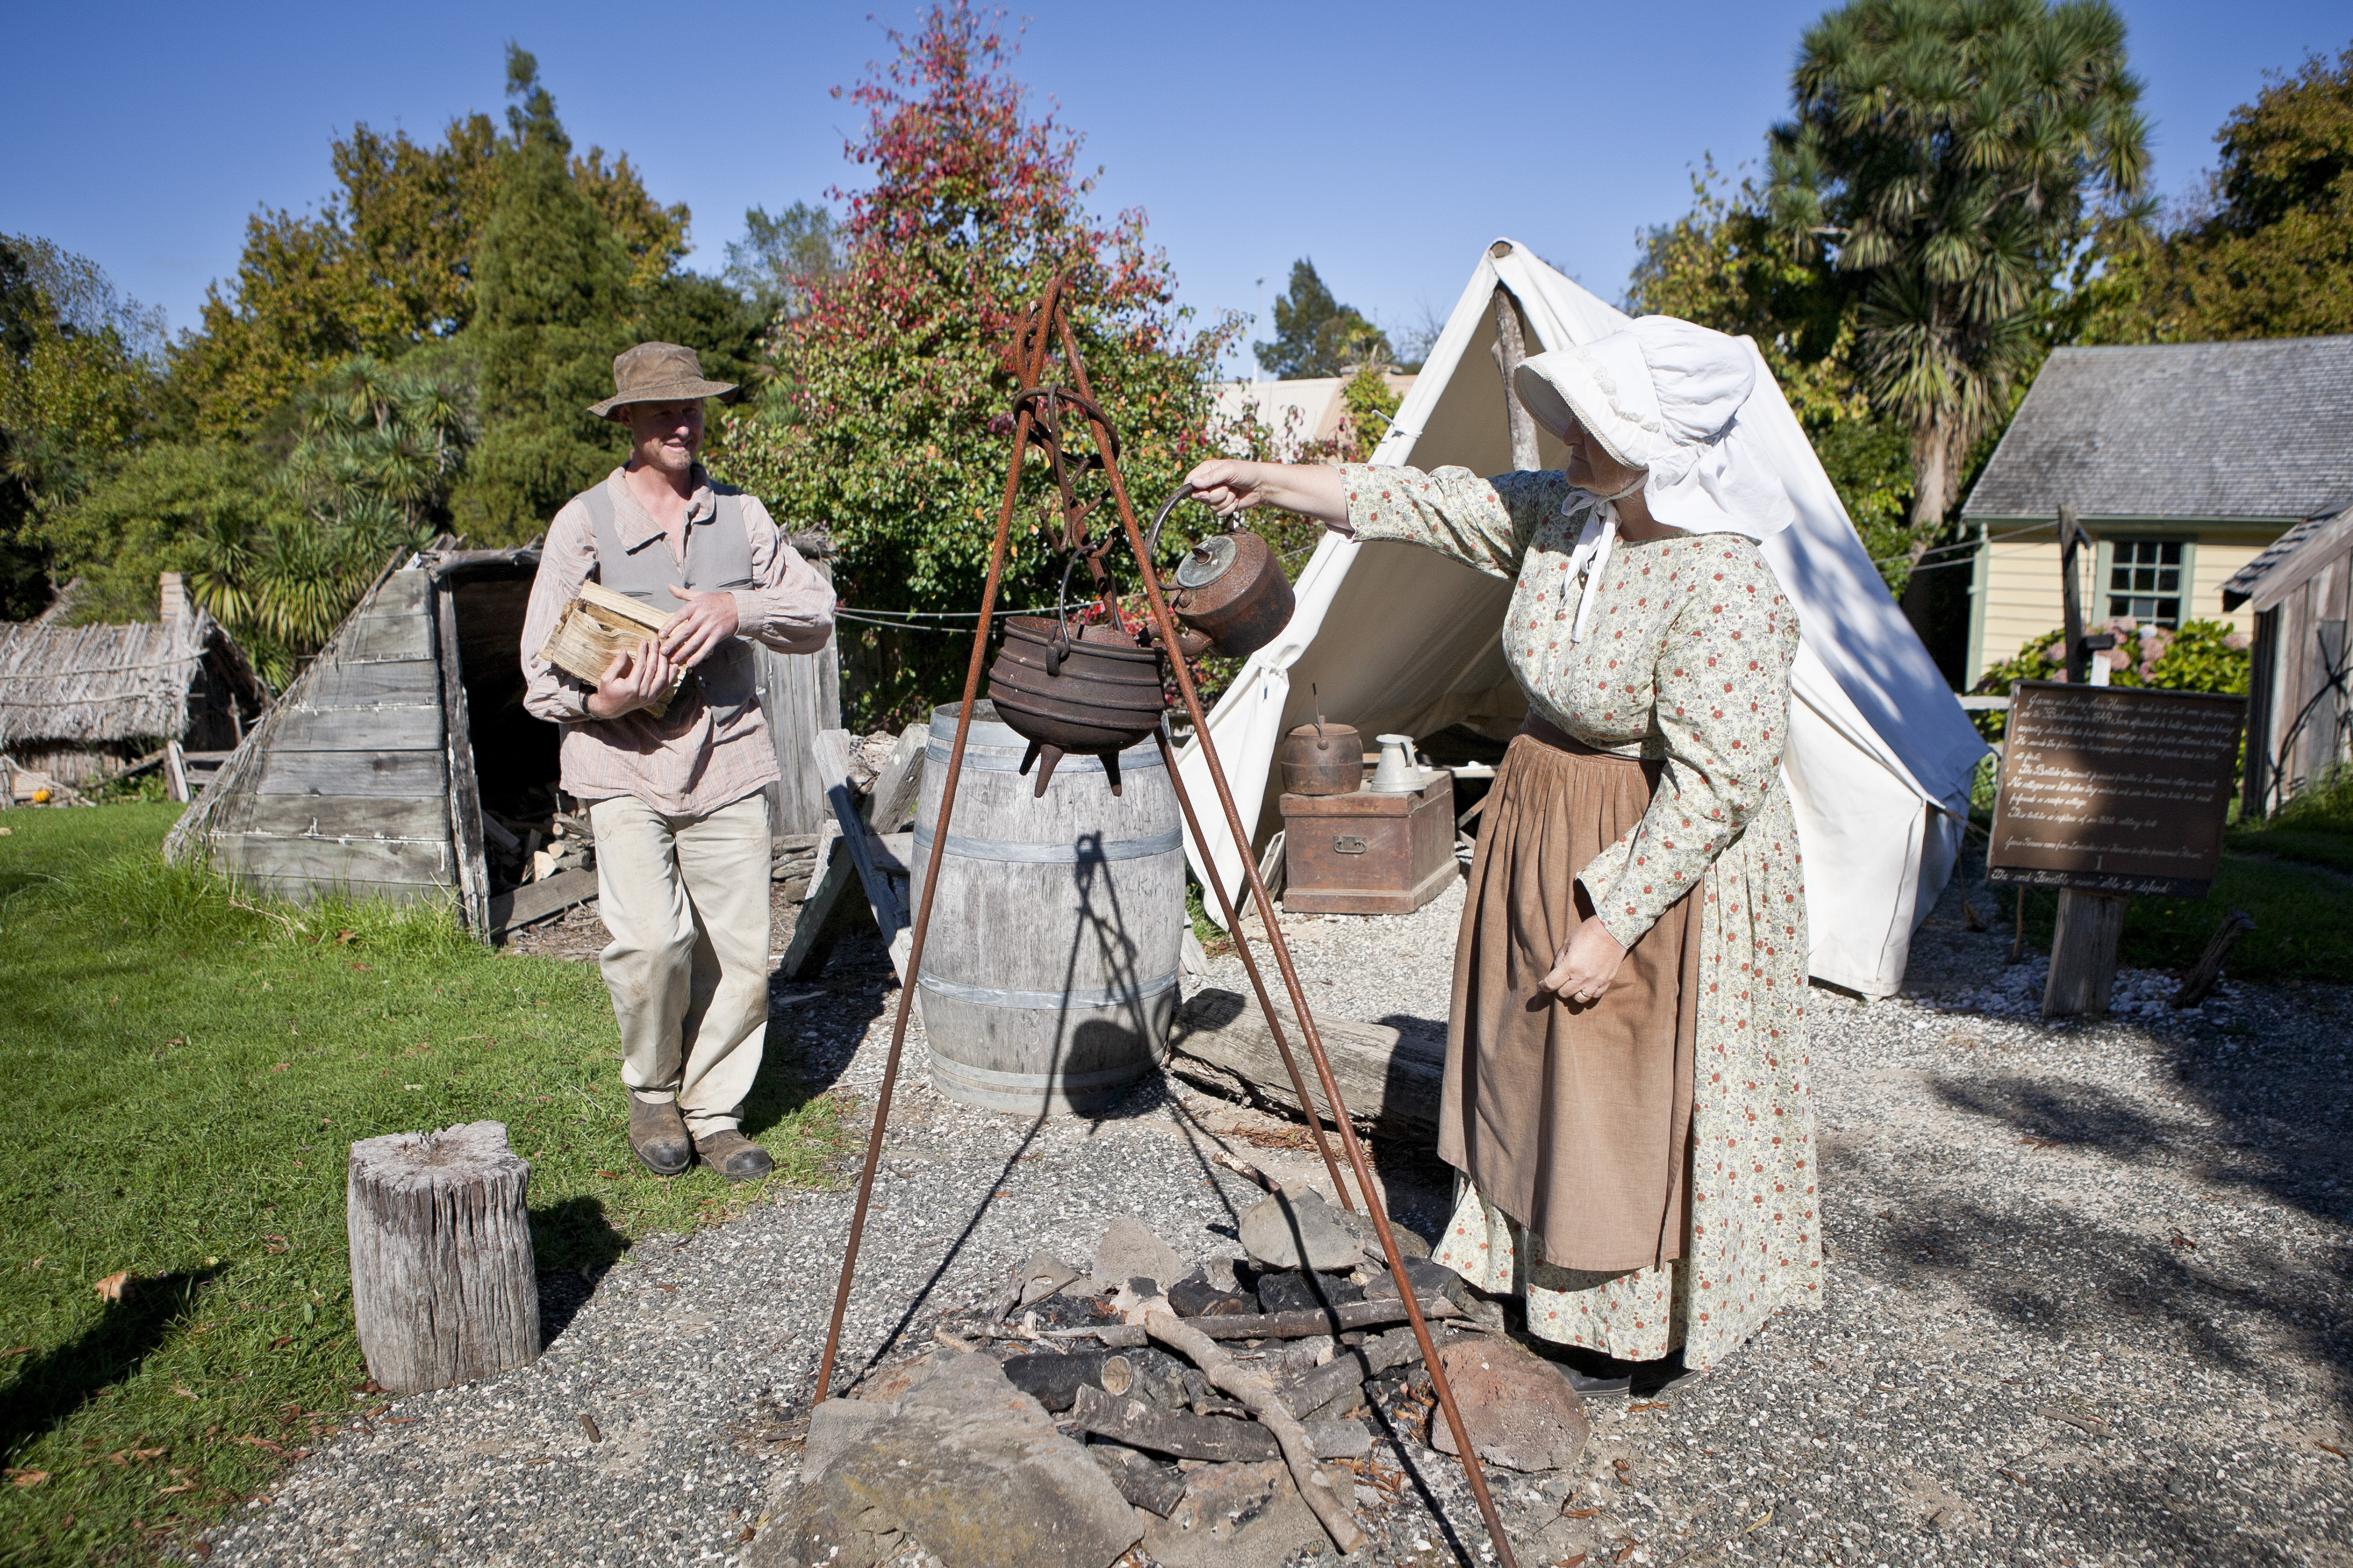 Volunteers at a 'live day' at Howick Historical Village where they re-enact the lifestyle of early settlers